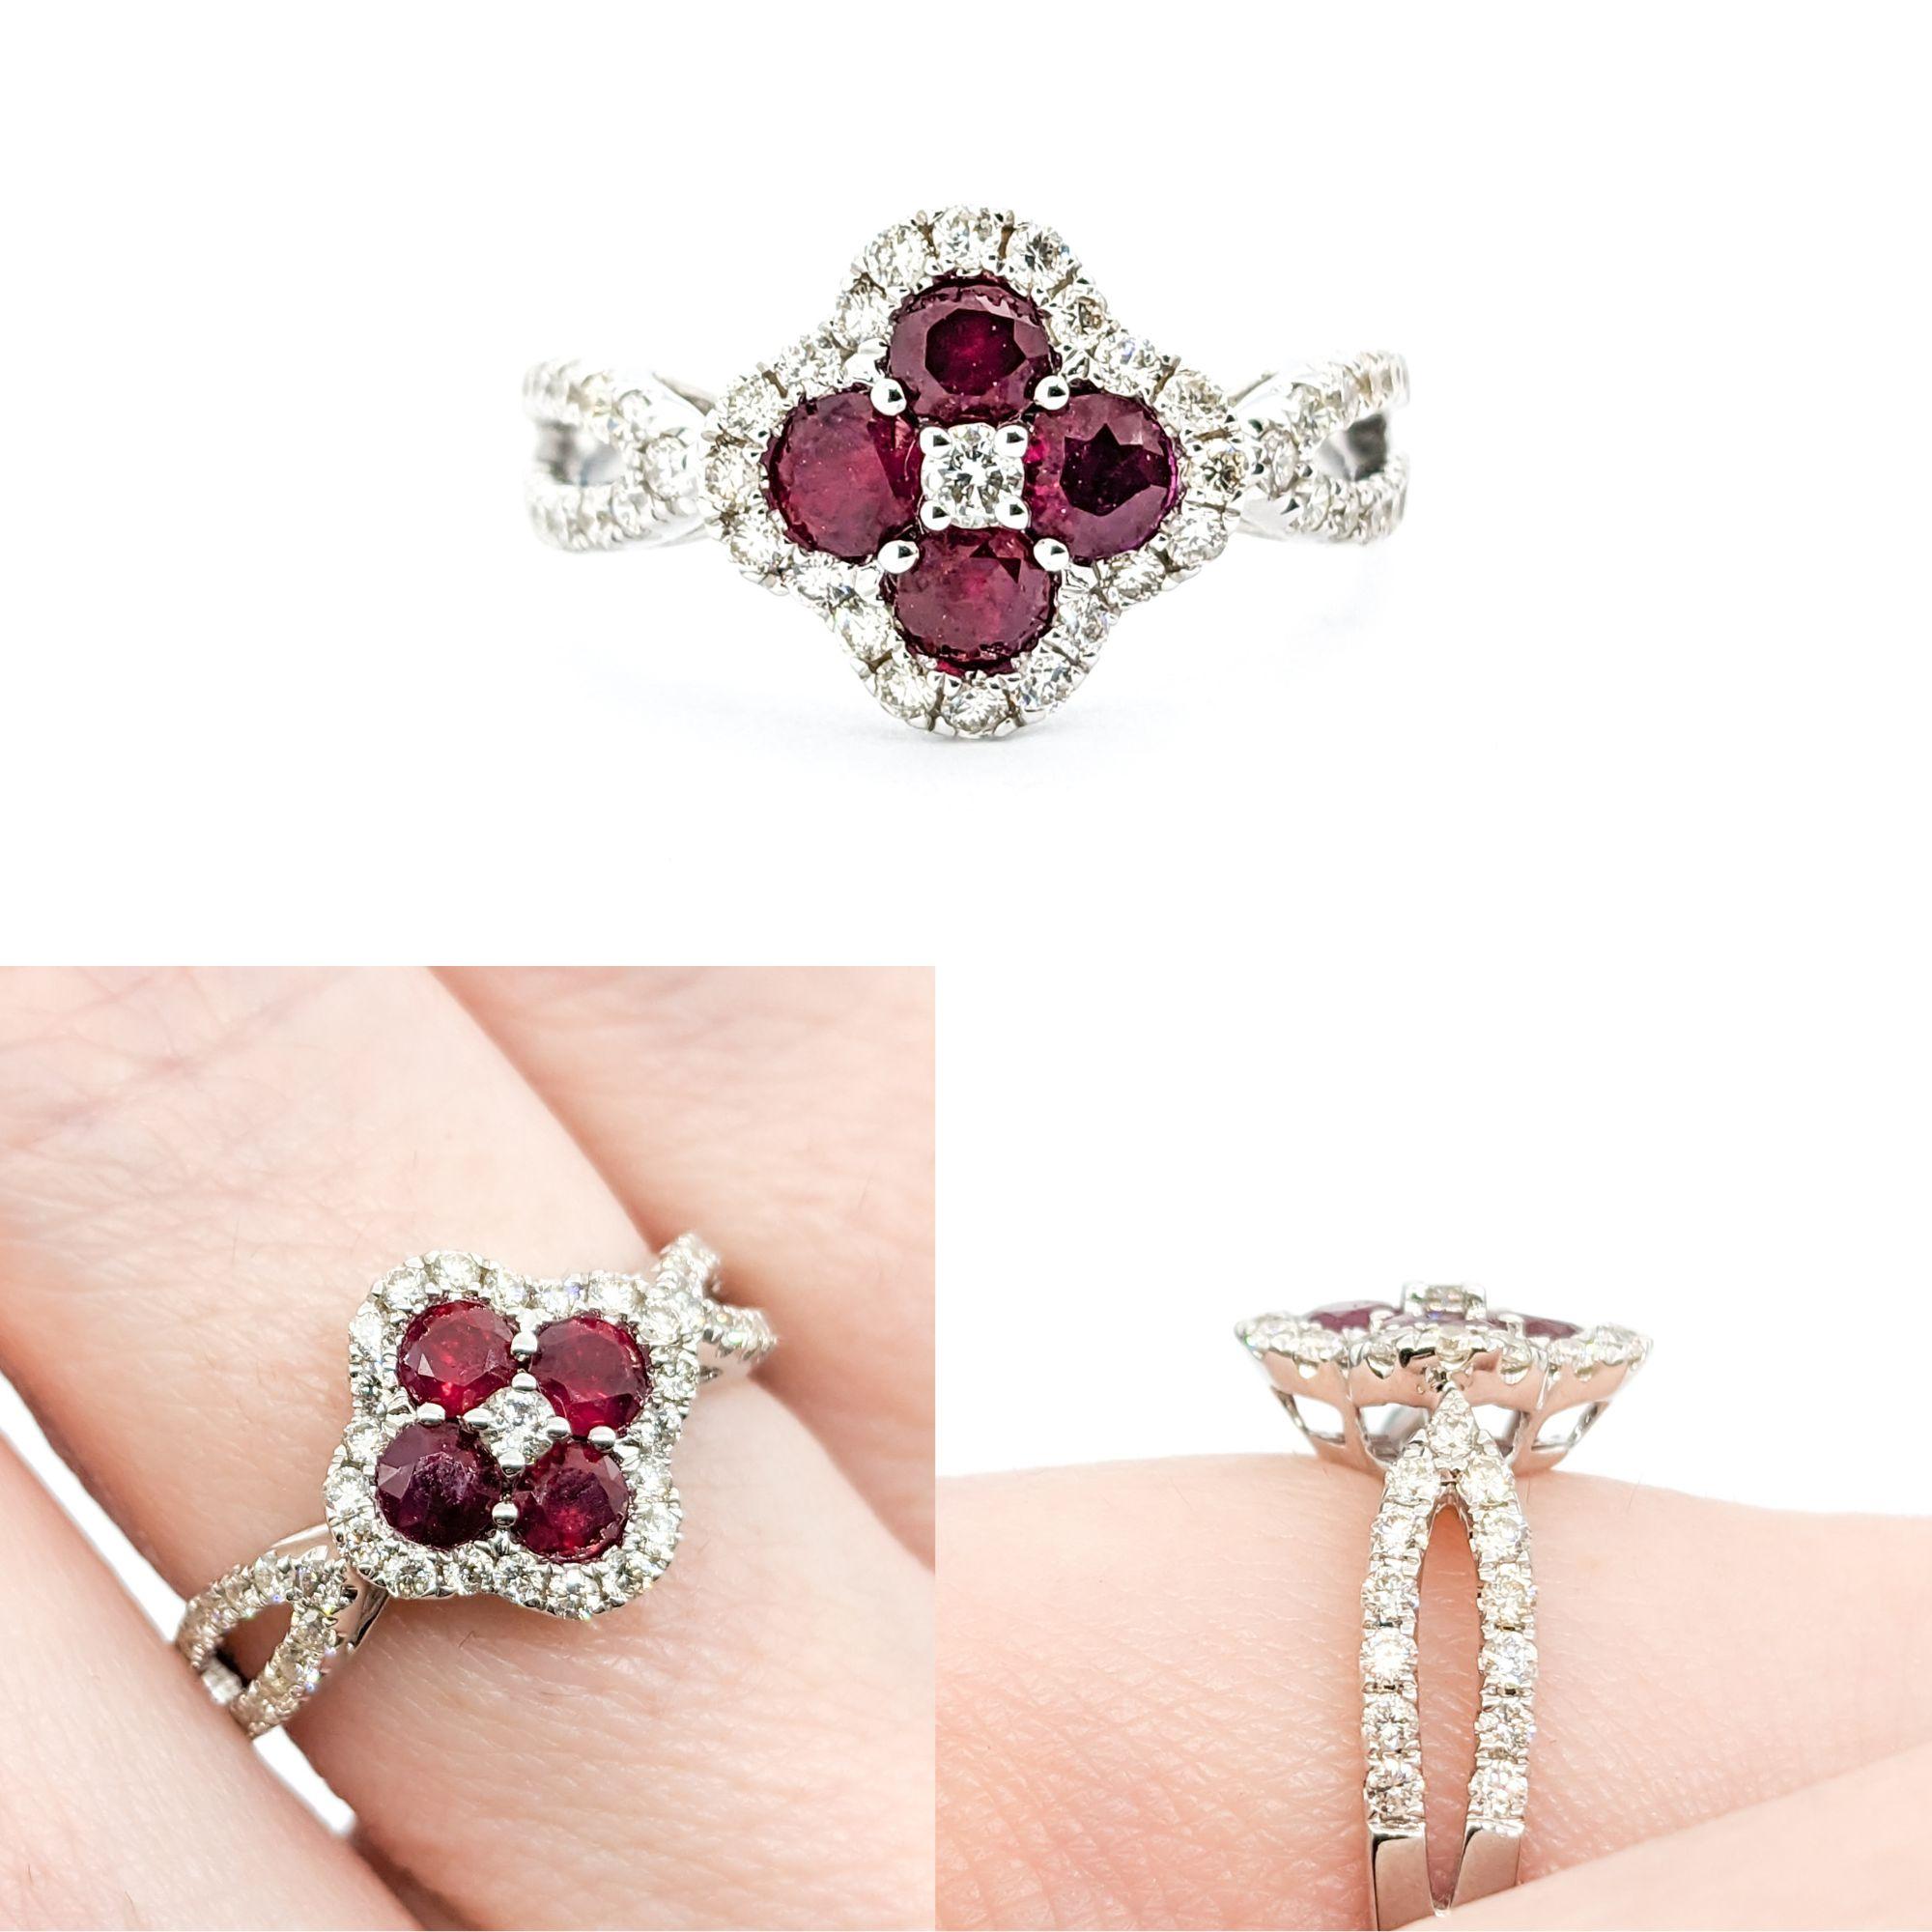 .73ctw Ruby & Diamond Ring In White Gold

Presenting an exquisite Ring, masterfully crafted in 14kt White Gold. This elegant piece showcases a harmonious blend of precious stones, featuring .54ctw of Diamonds and .73ctw of Ruby. The Diamonds sparkle